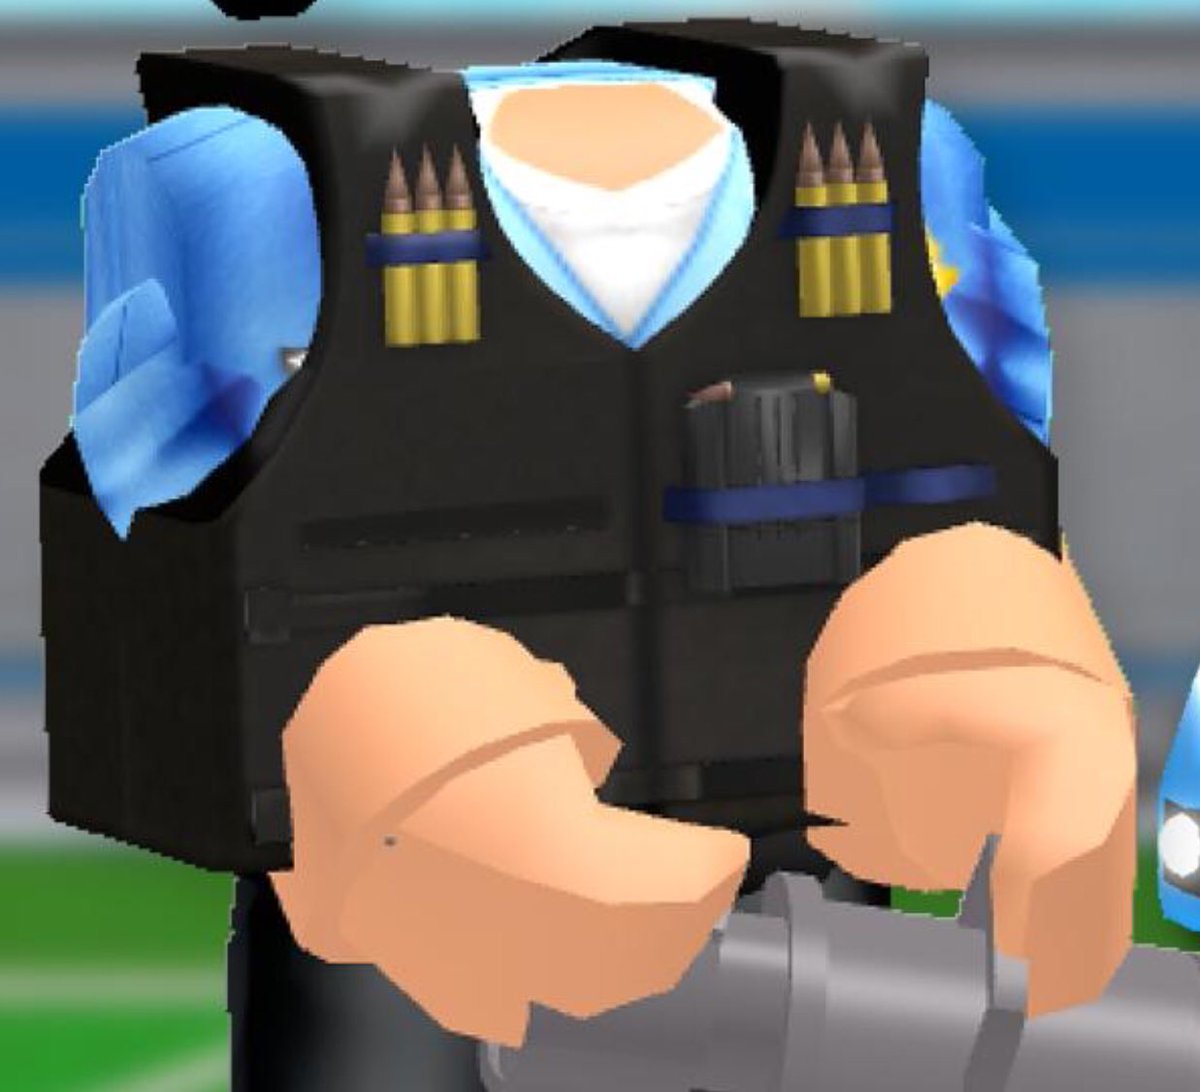 Adam On Twitter They Dont Have Too A Simple Move Of The Arms And Specific Parts Of The Body In C4d Blender Even In Studio Can Make It More Realistic Https T Co Wymsmbjbea - realistic bulletproof vest roblox